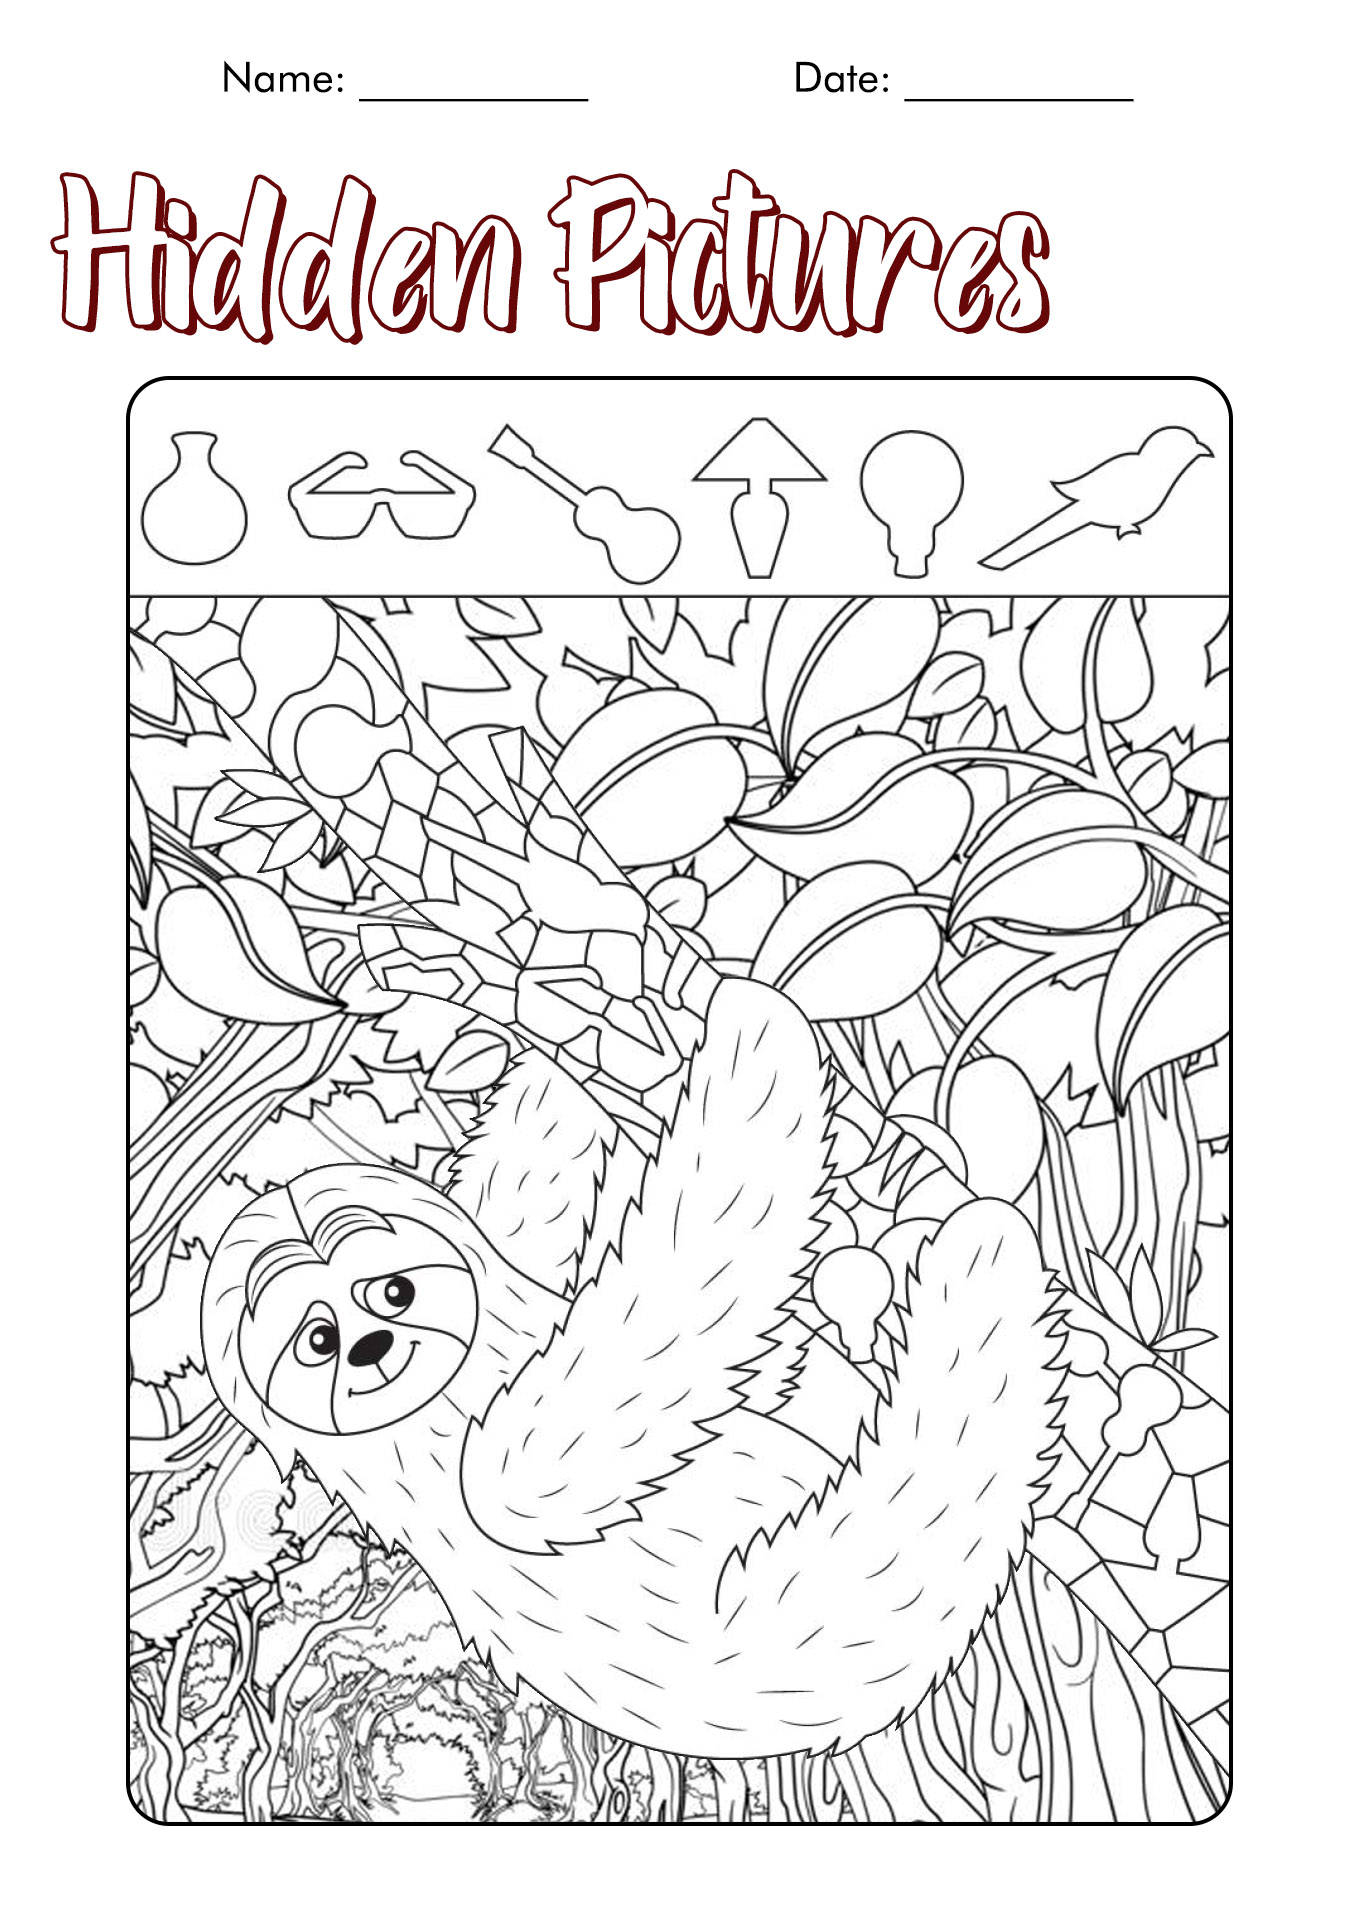 15 Best Images of I Spy Worksheets Difficult I Spy Coloring Pages for